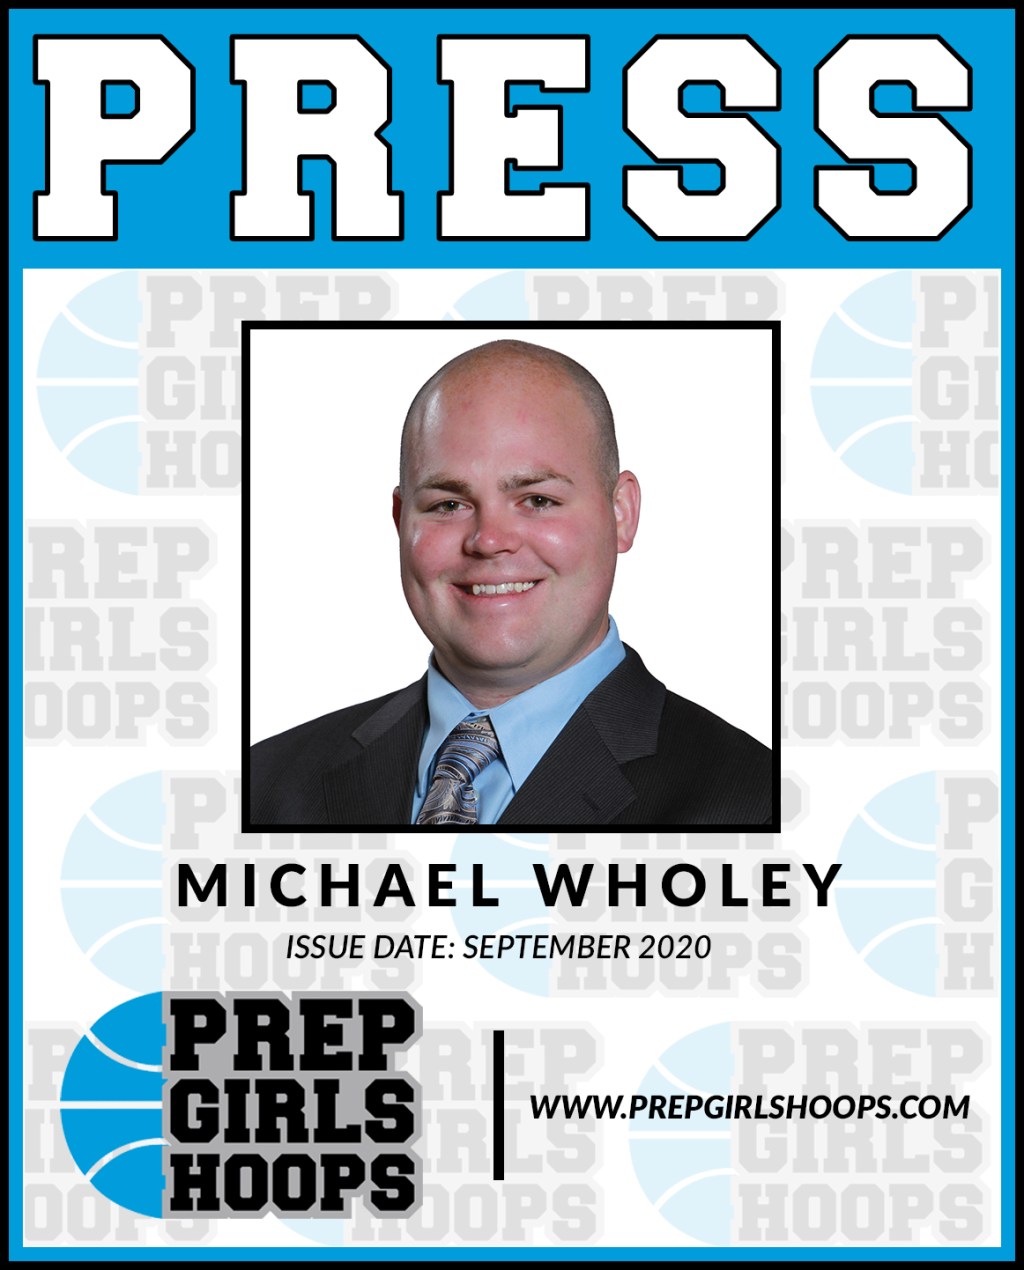 Michael Wholey Joins Prep Girls Hoops Florida as Senior Scout